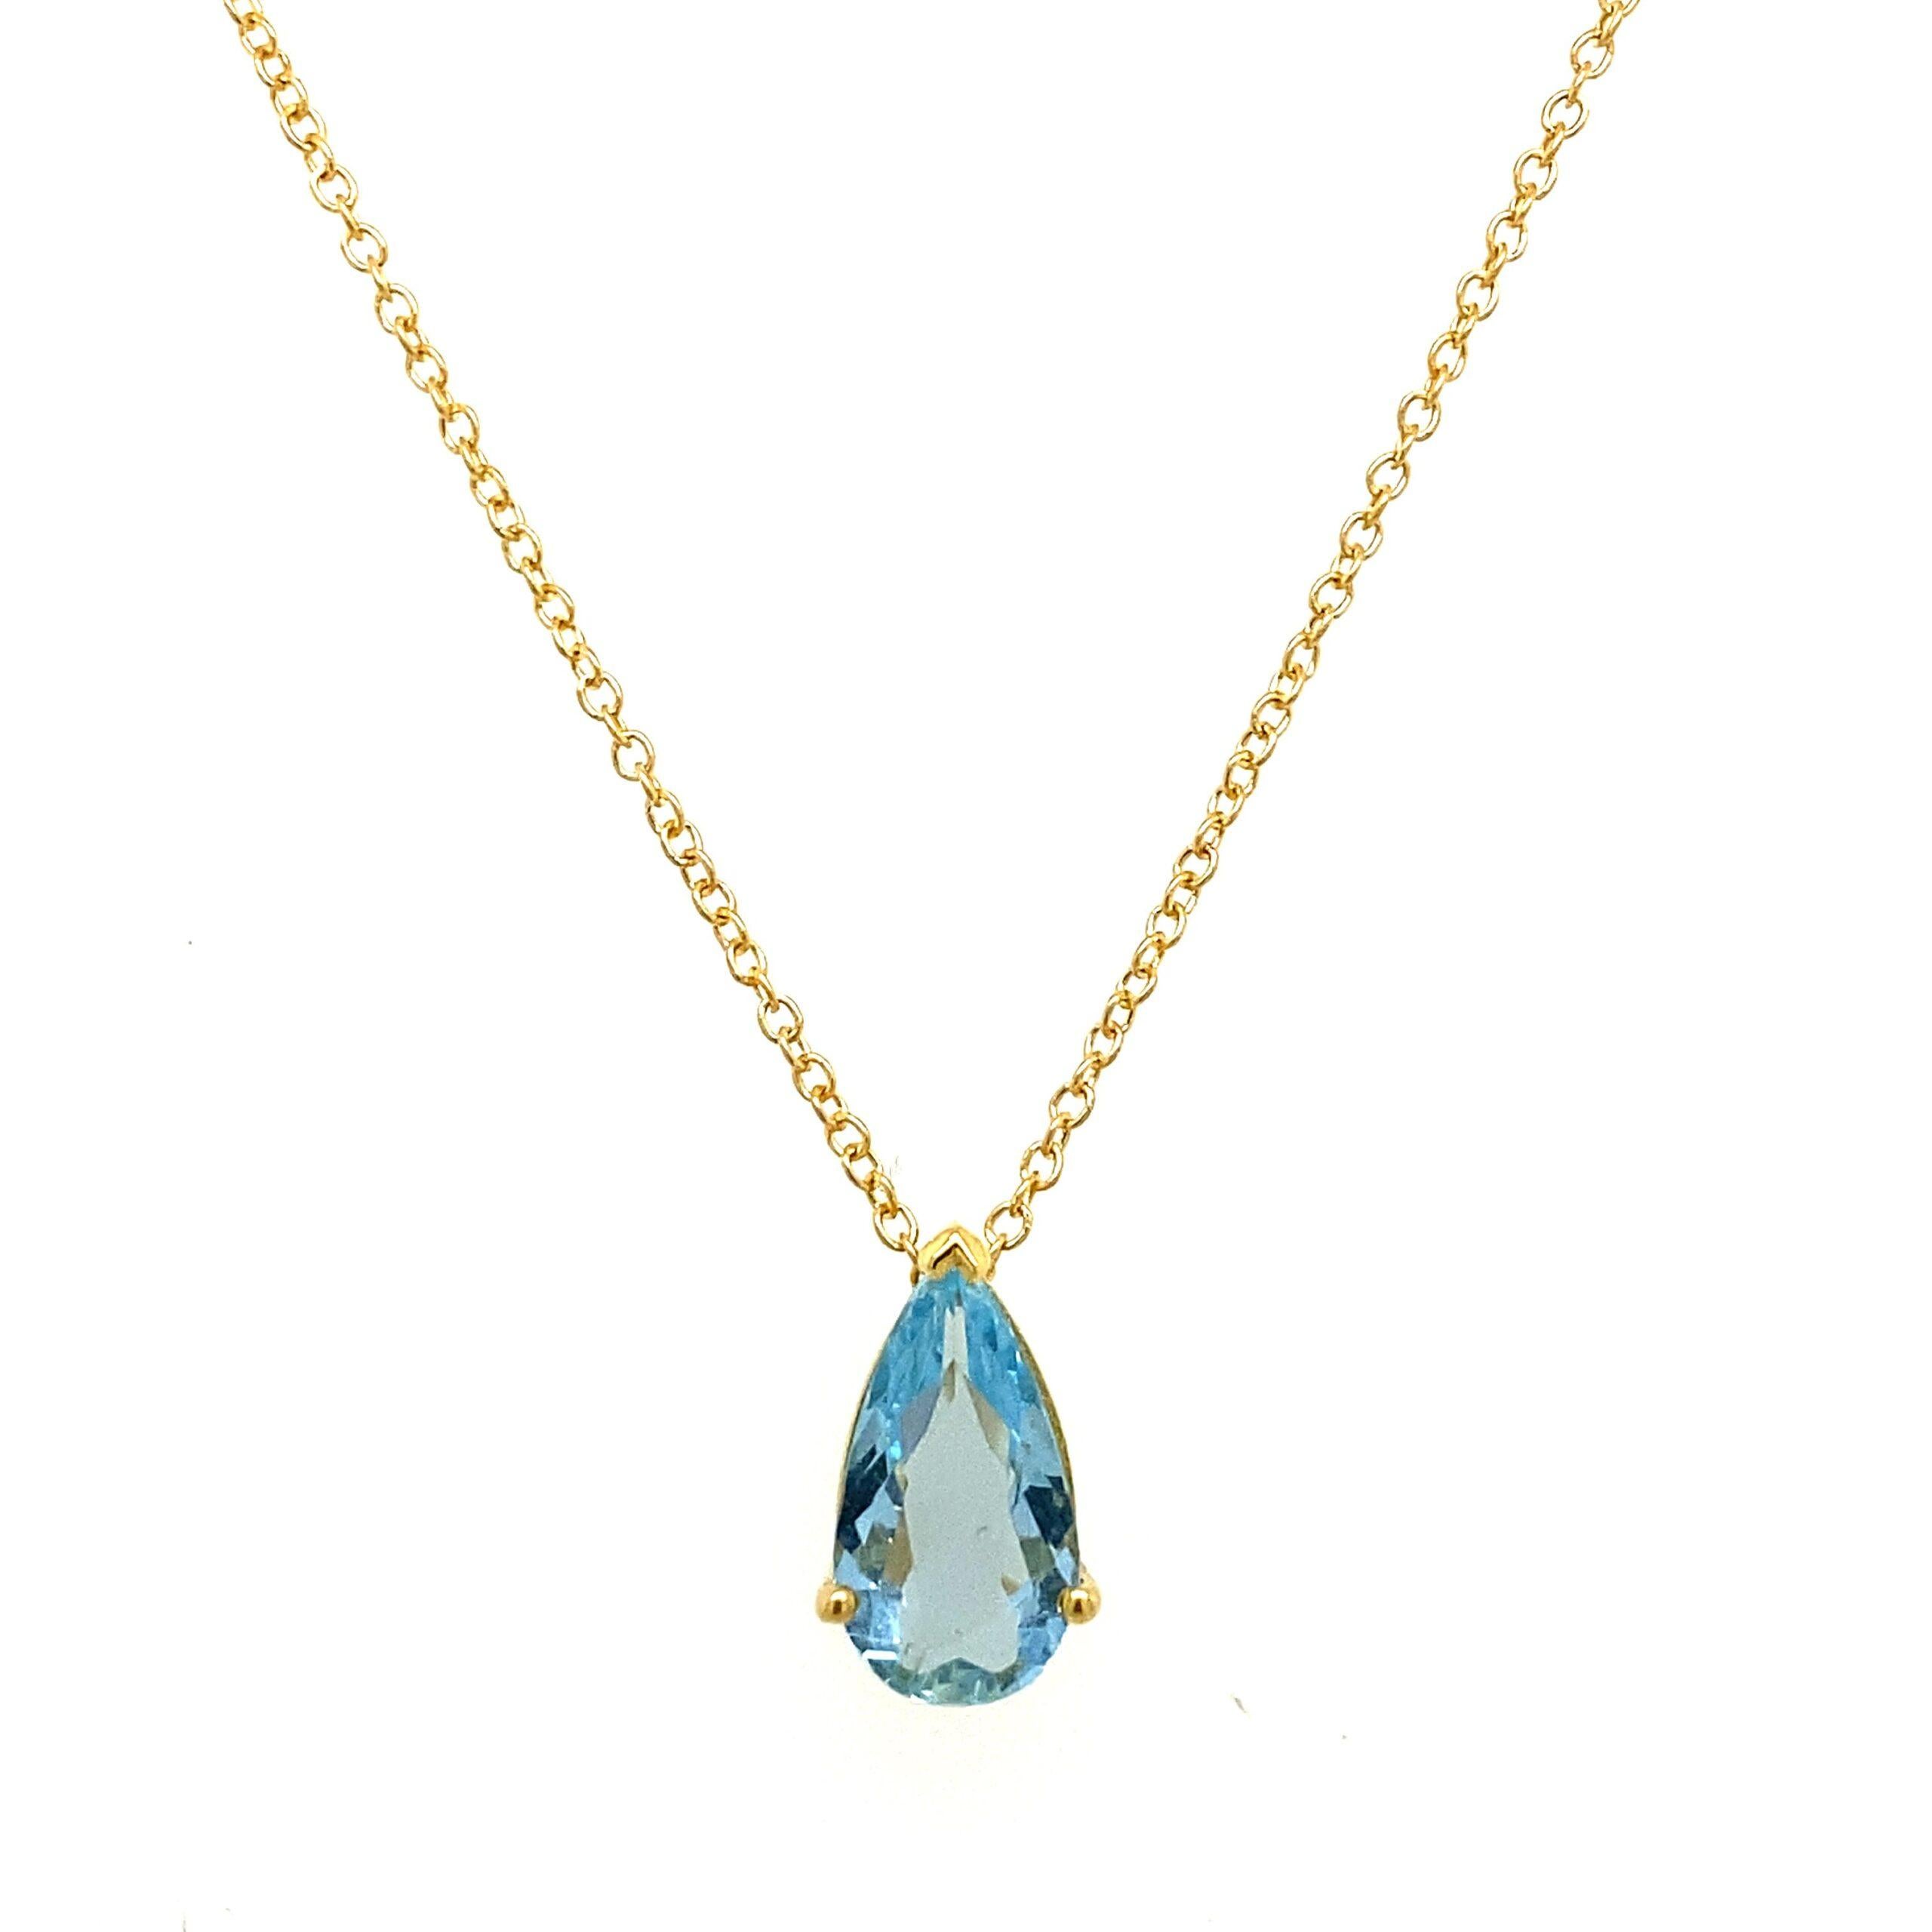 18ct Yellow Gold Fine Quality 1.02ct Pear Shape Aquamarine Pendant & 18ct Yellow Gold Chain.

Additional Information:
Total Weight: 2.3g  
16-18'' Chain
Aquamarine Weight: 1.02ct
Pear Aquamarine Size: 10.5mm by 6.6mm
SMS3746